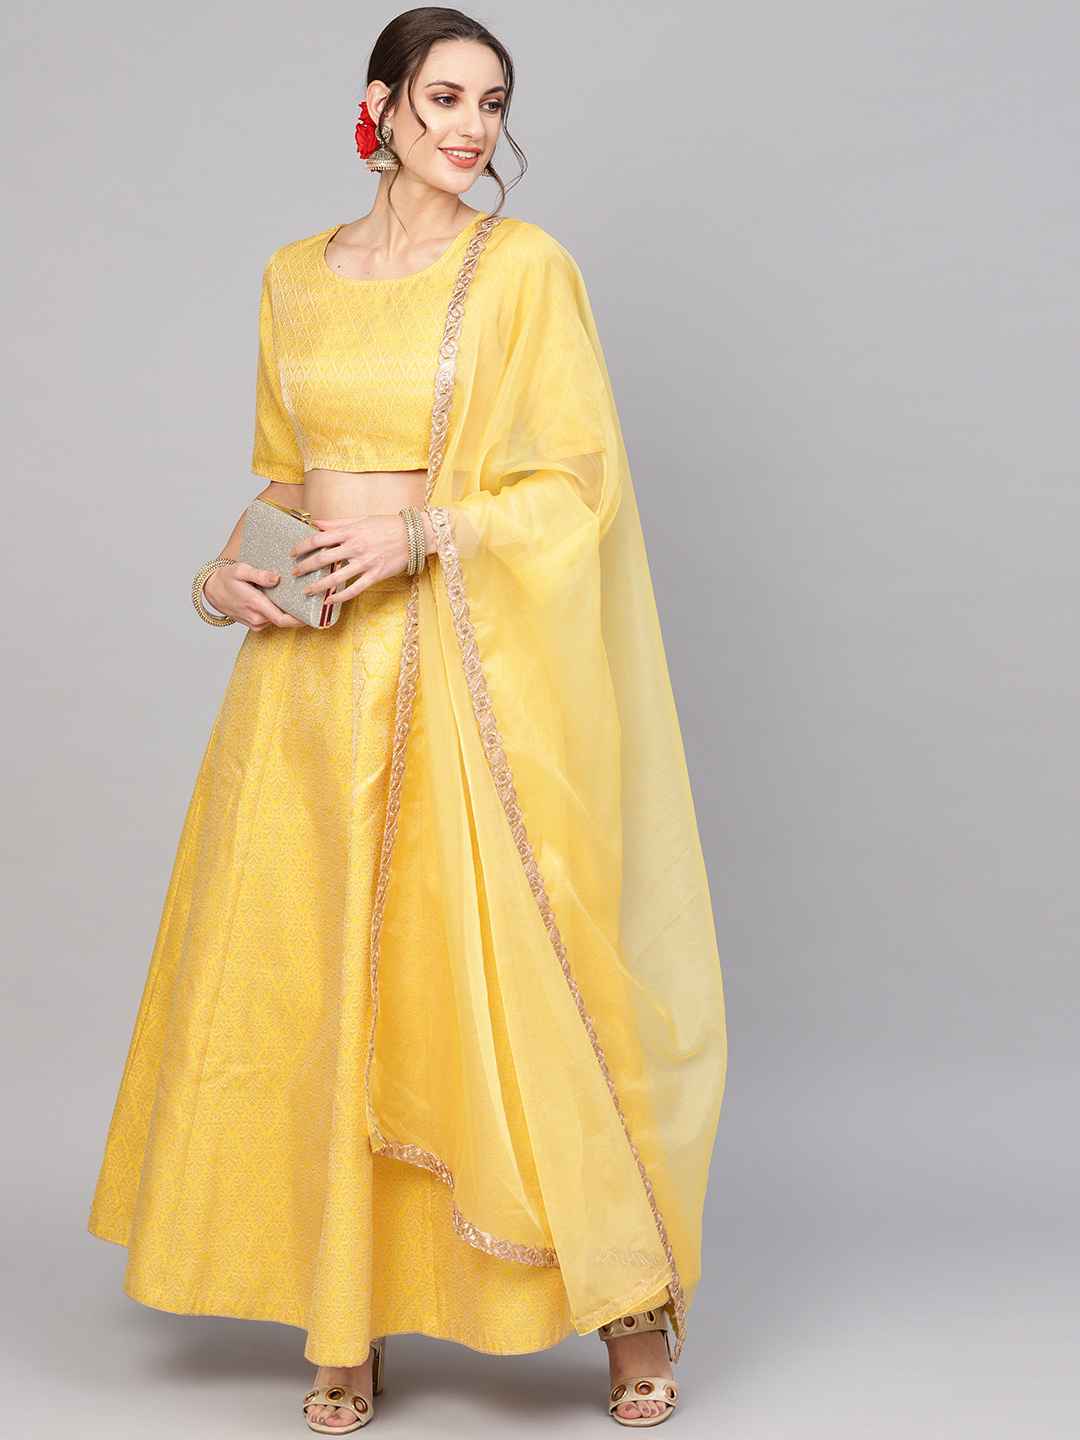 AKS-Yellow-and-Golden-Woven-Design-Brocade-Ready-to-Wear-Lehenga-with-Blouse